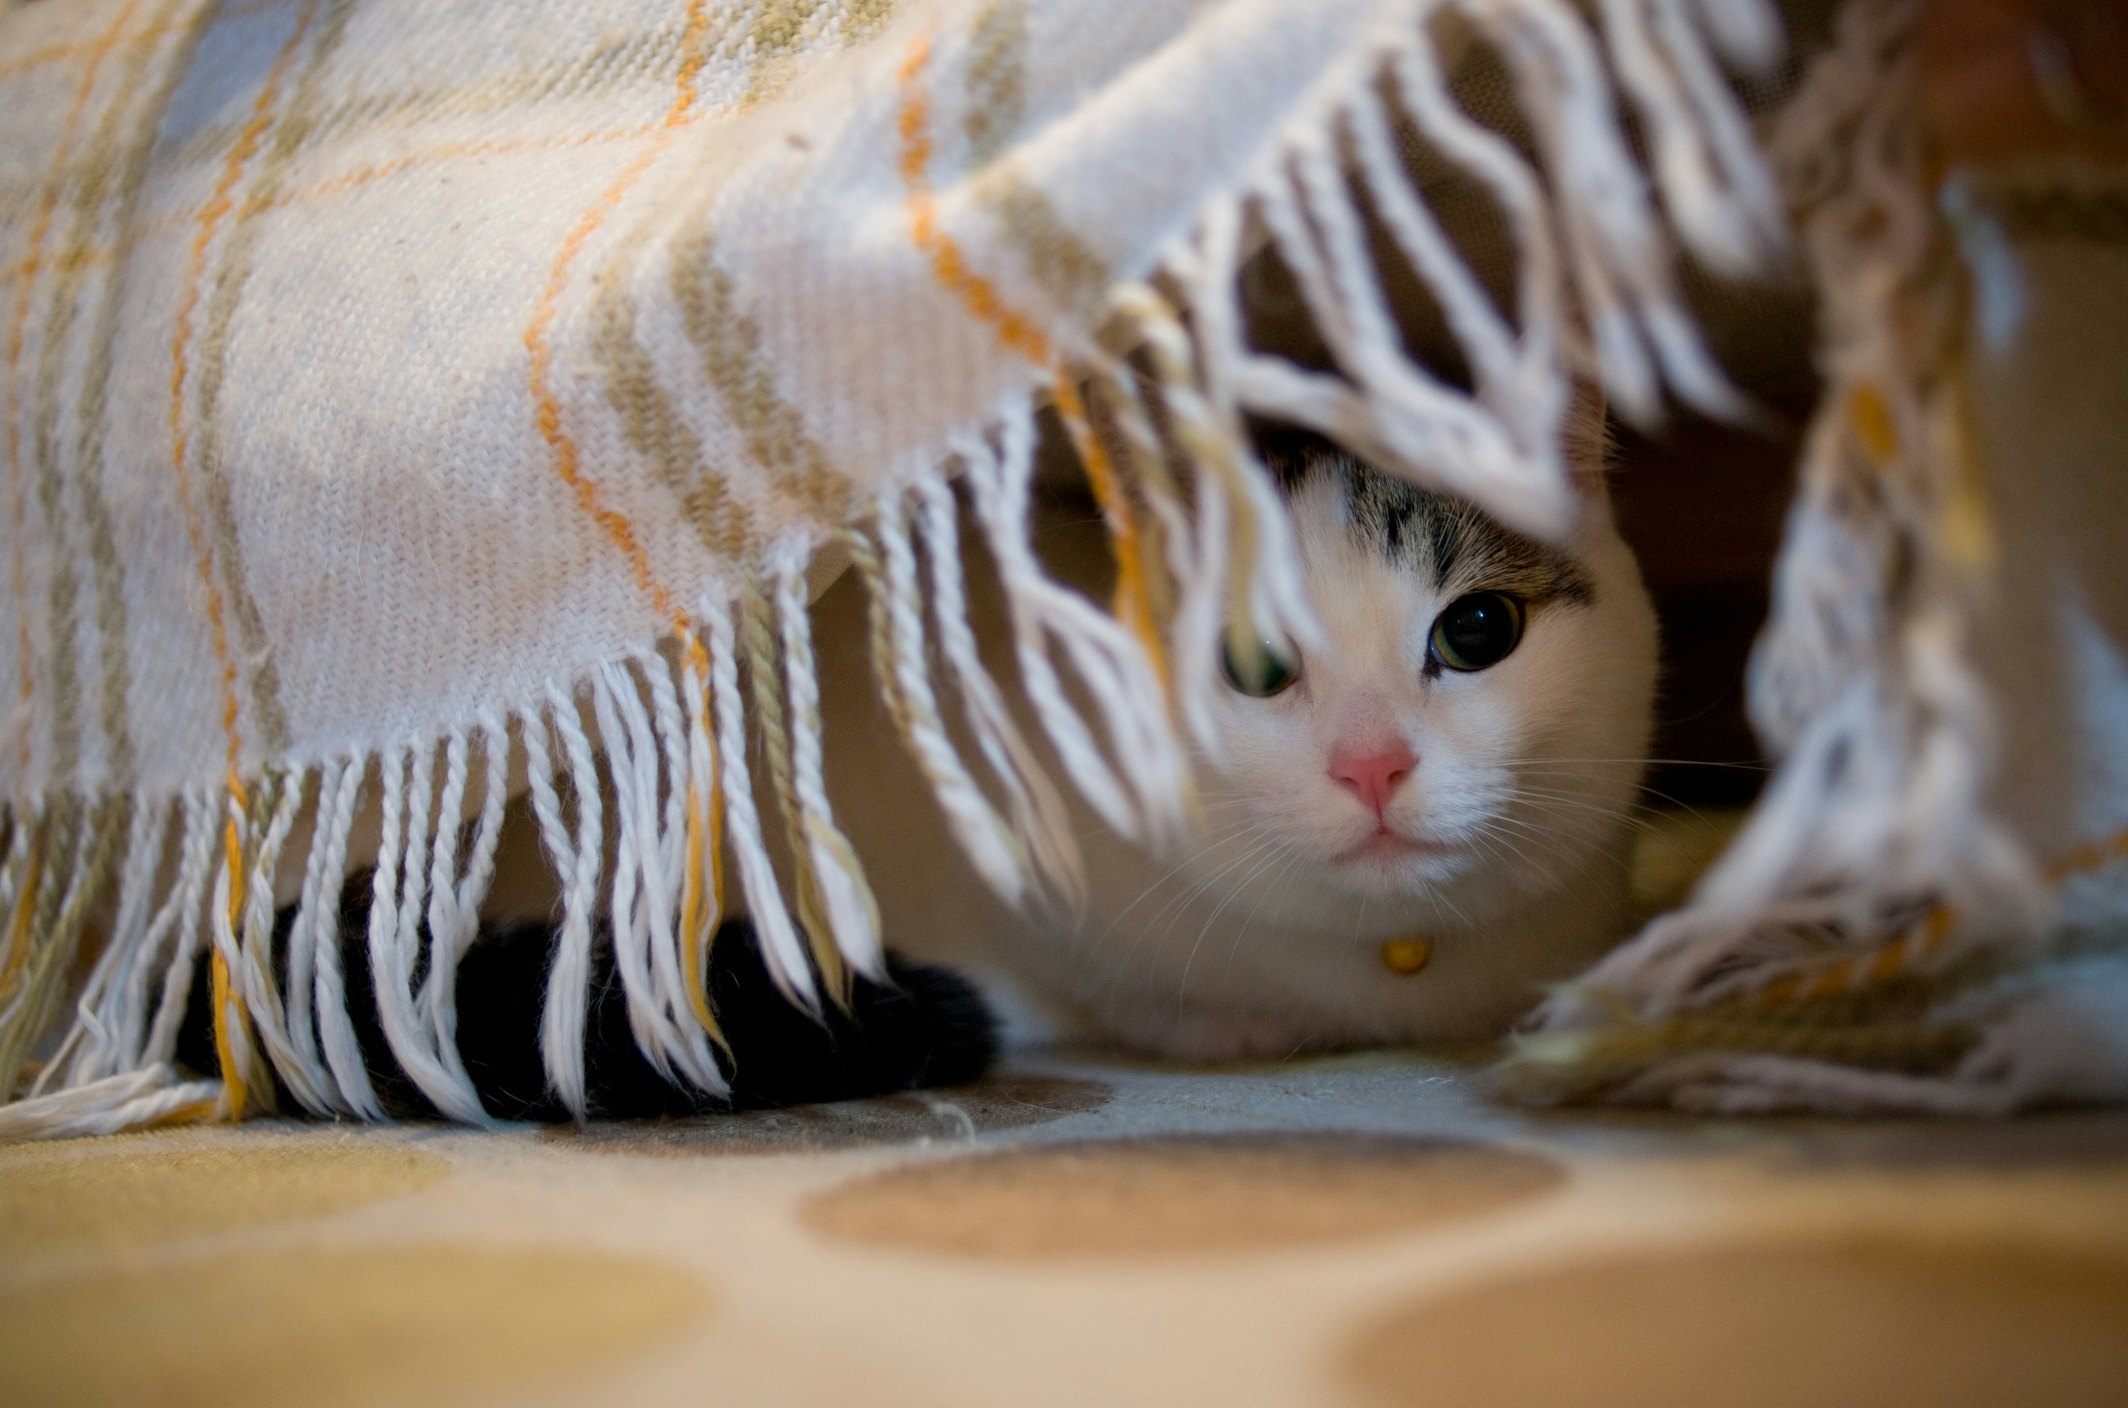 Why Is My Cat Hiding All The Time, & When Should I Worry?